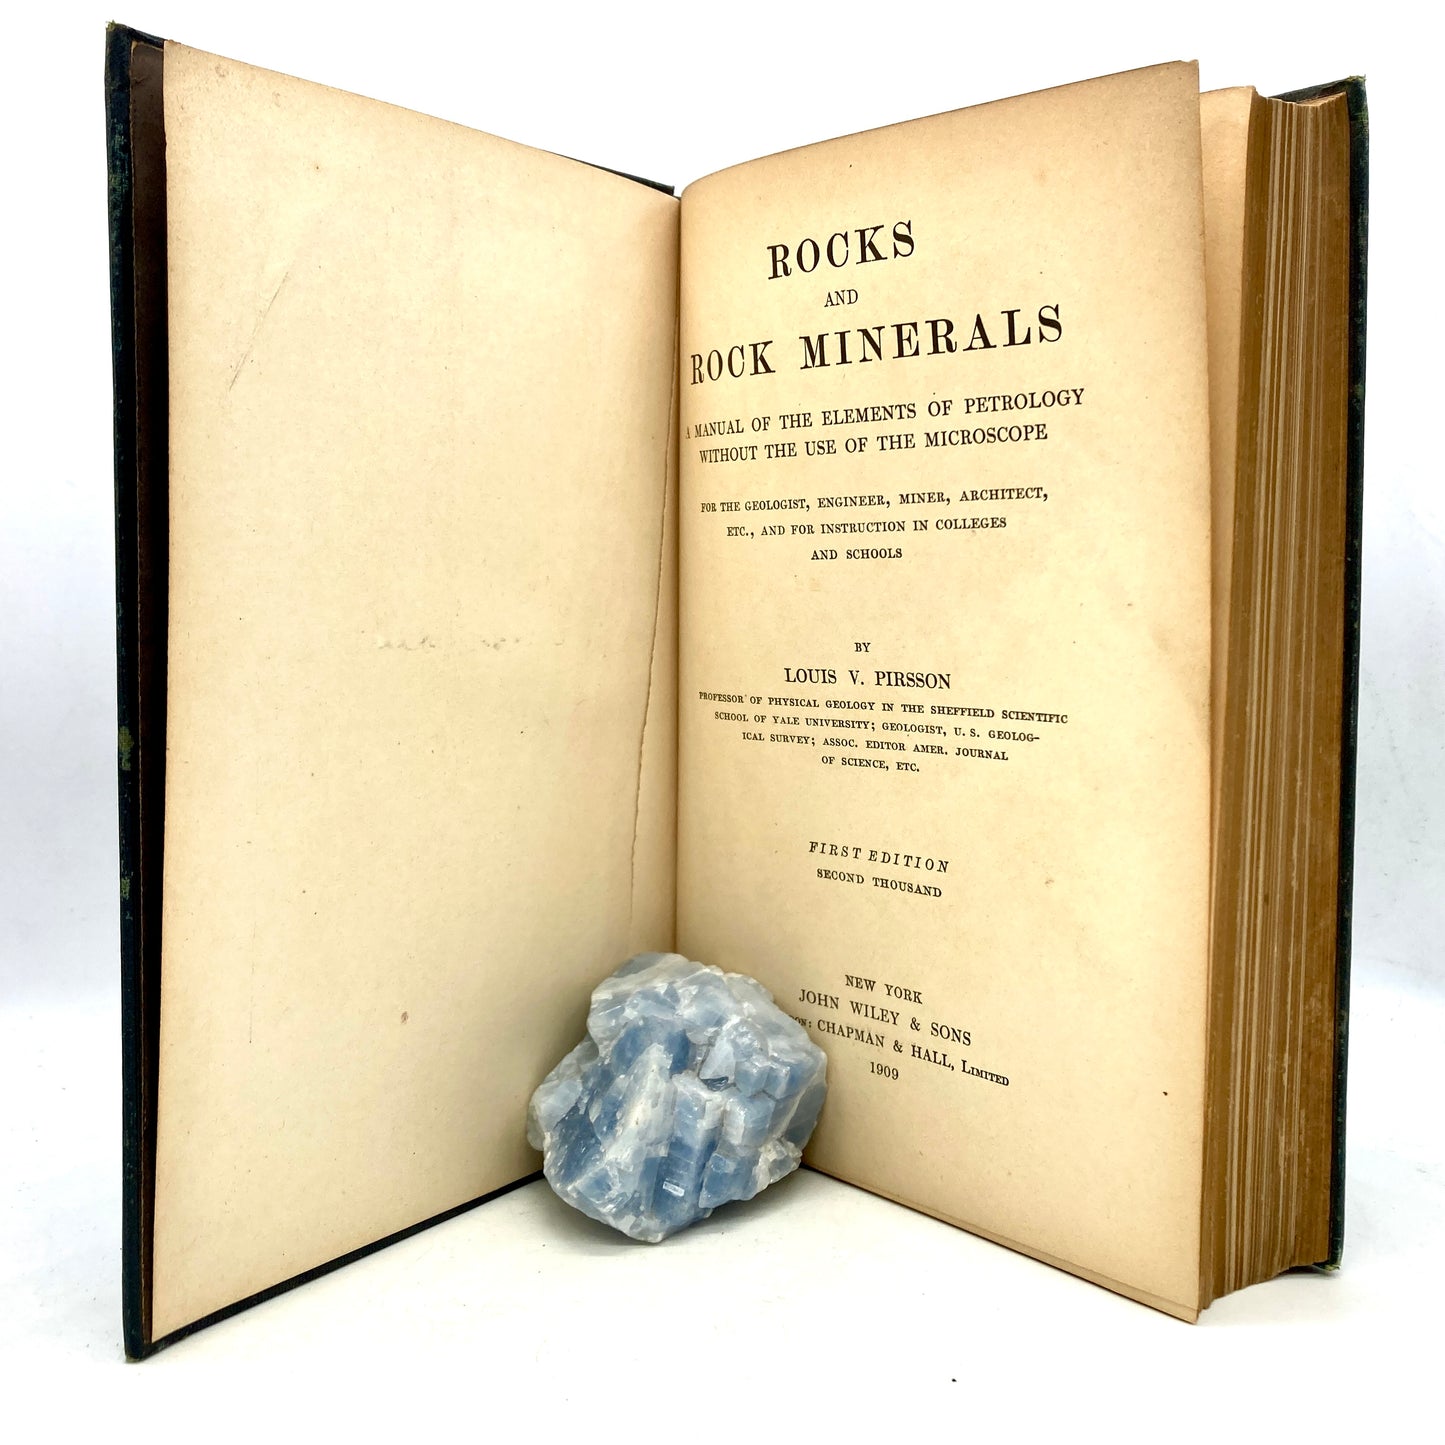 PIRSSON, Louis V. "Rocks and Rock Minerals" [John Wiley & Sons, 1909] - Buzz Bookstore